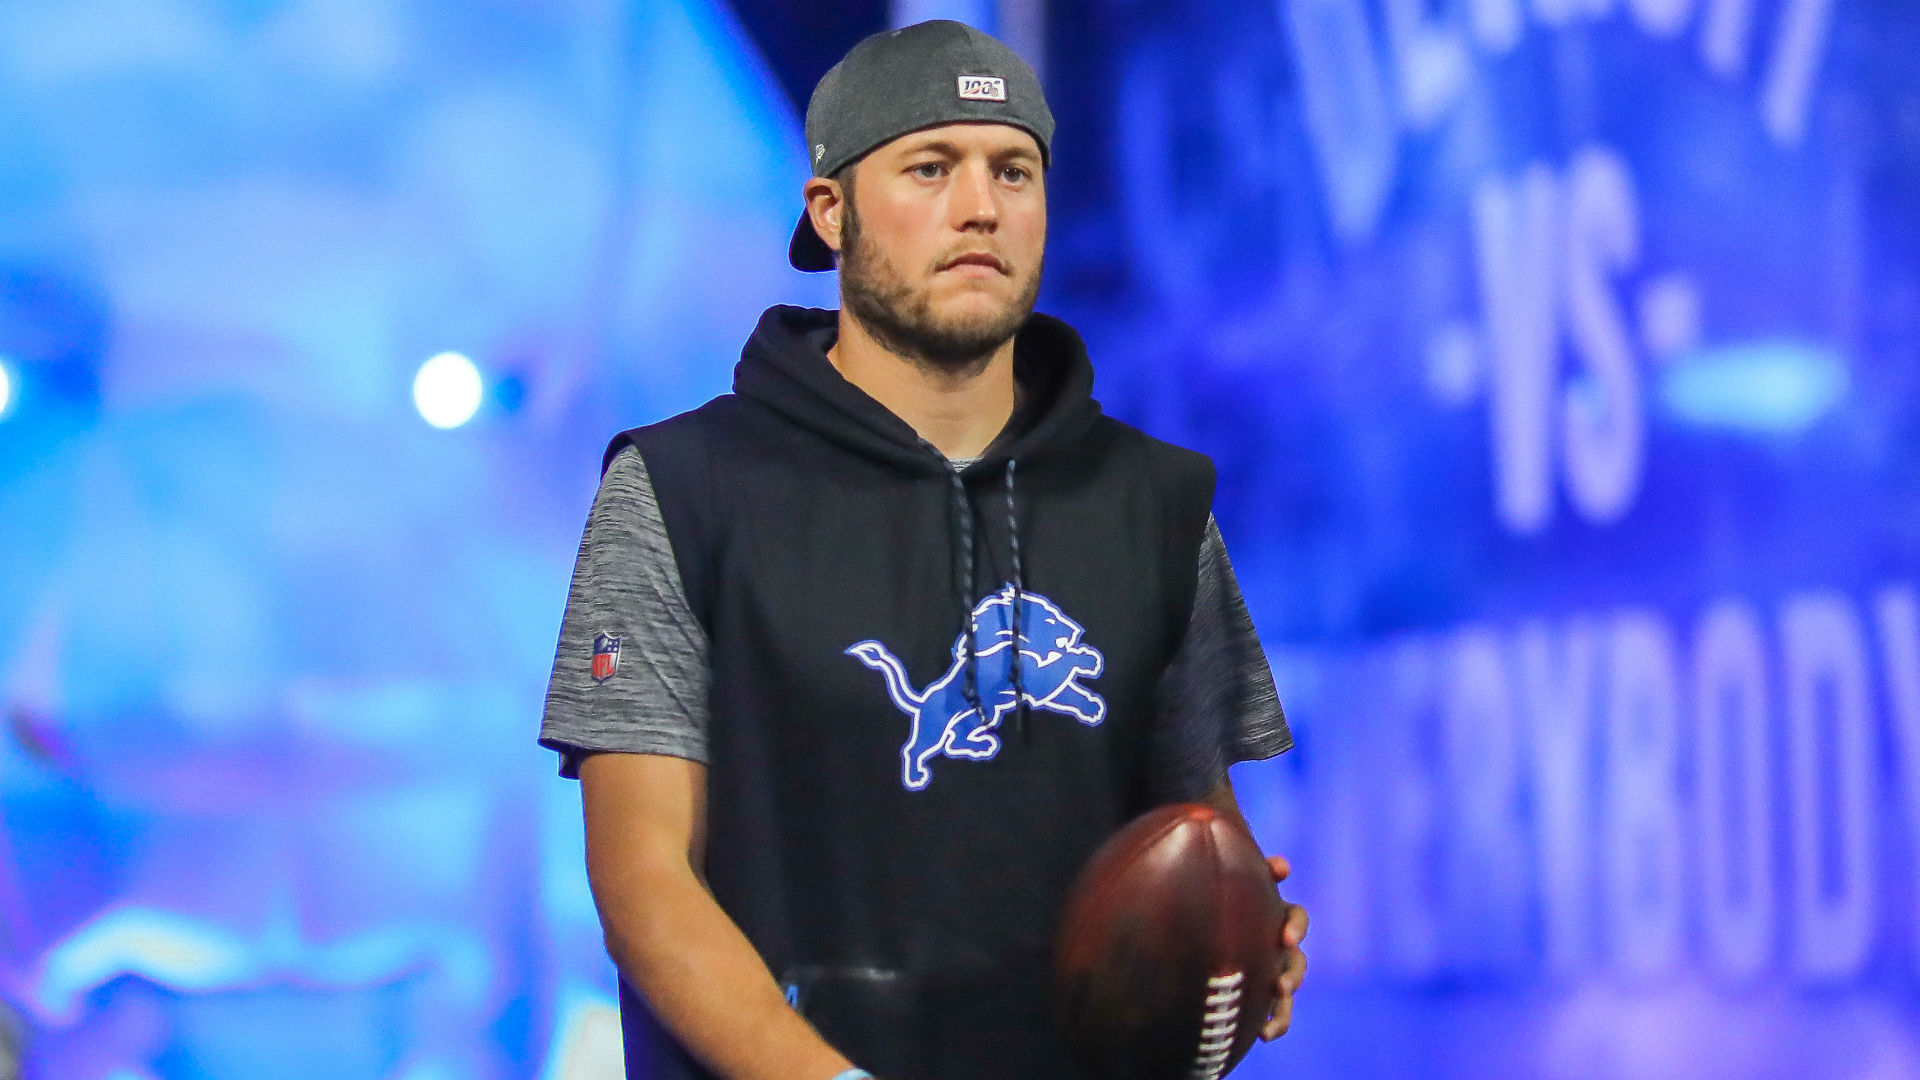 Matthew Stafford would have accepted a trade anywhere but to the Patriots, per report